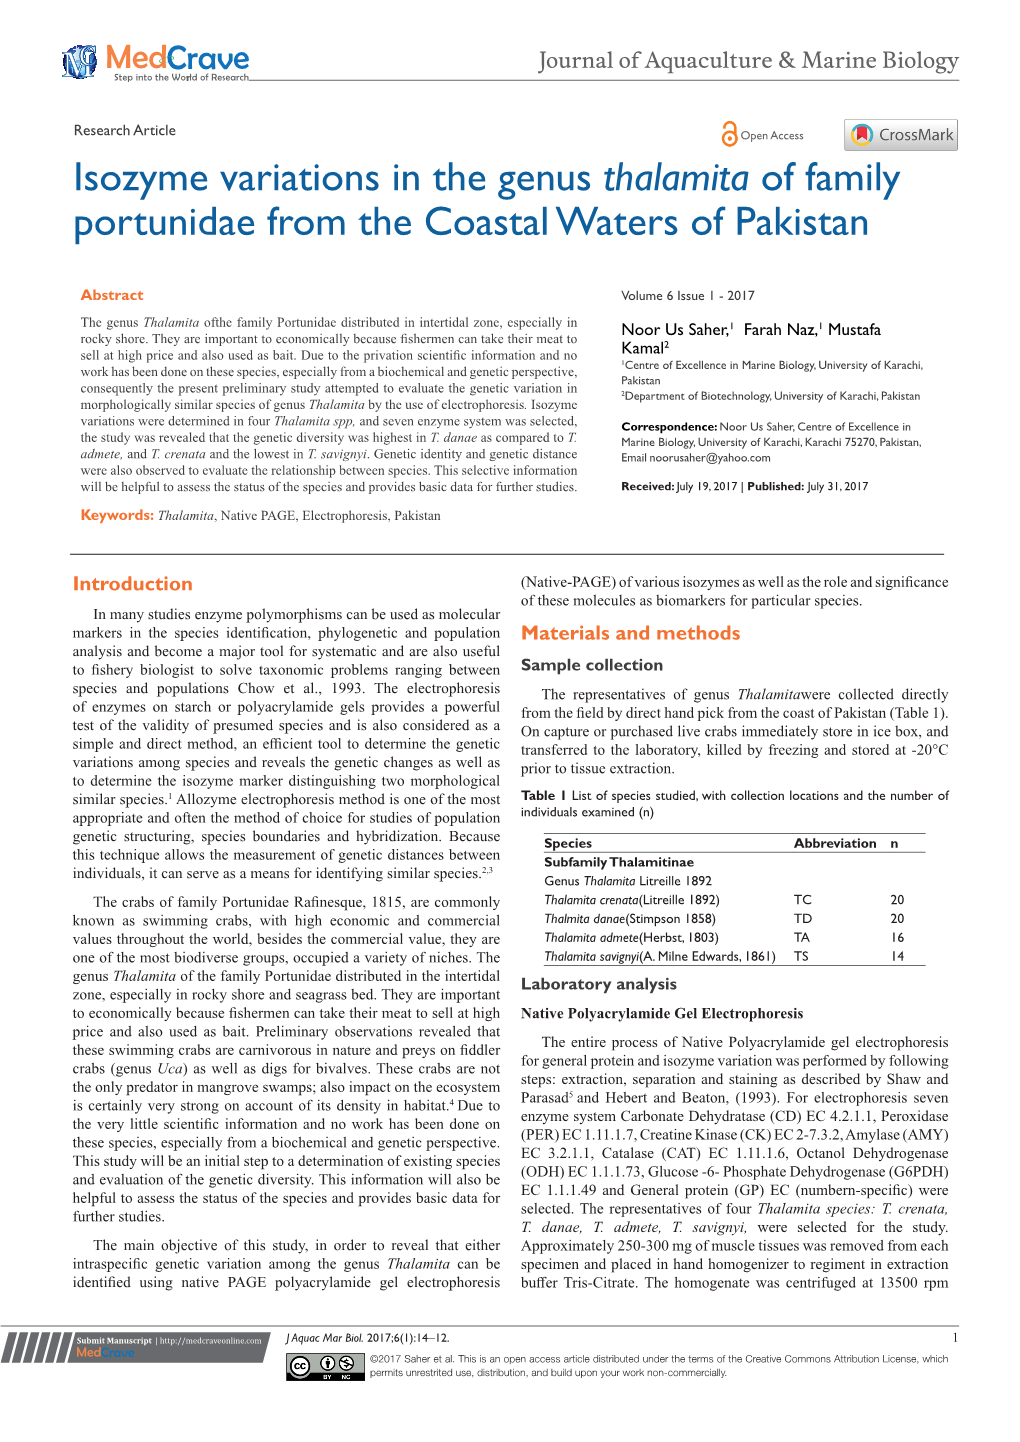 Isozyme Variations in the Genus Thalamita of Family Portunidae from the Coastal Waters of Pakistan